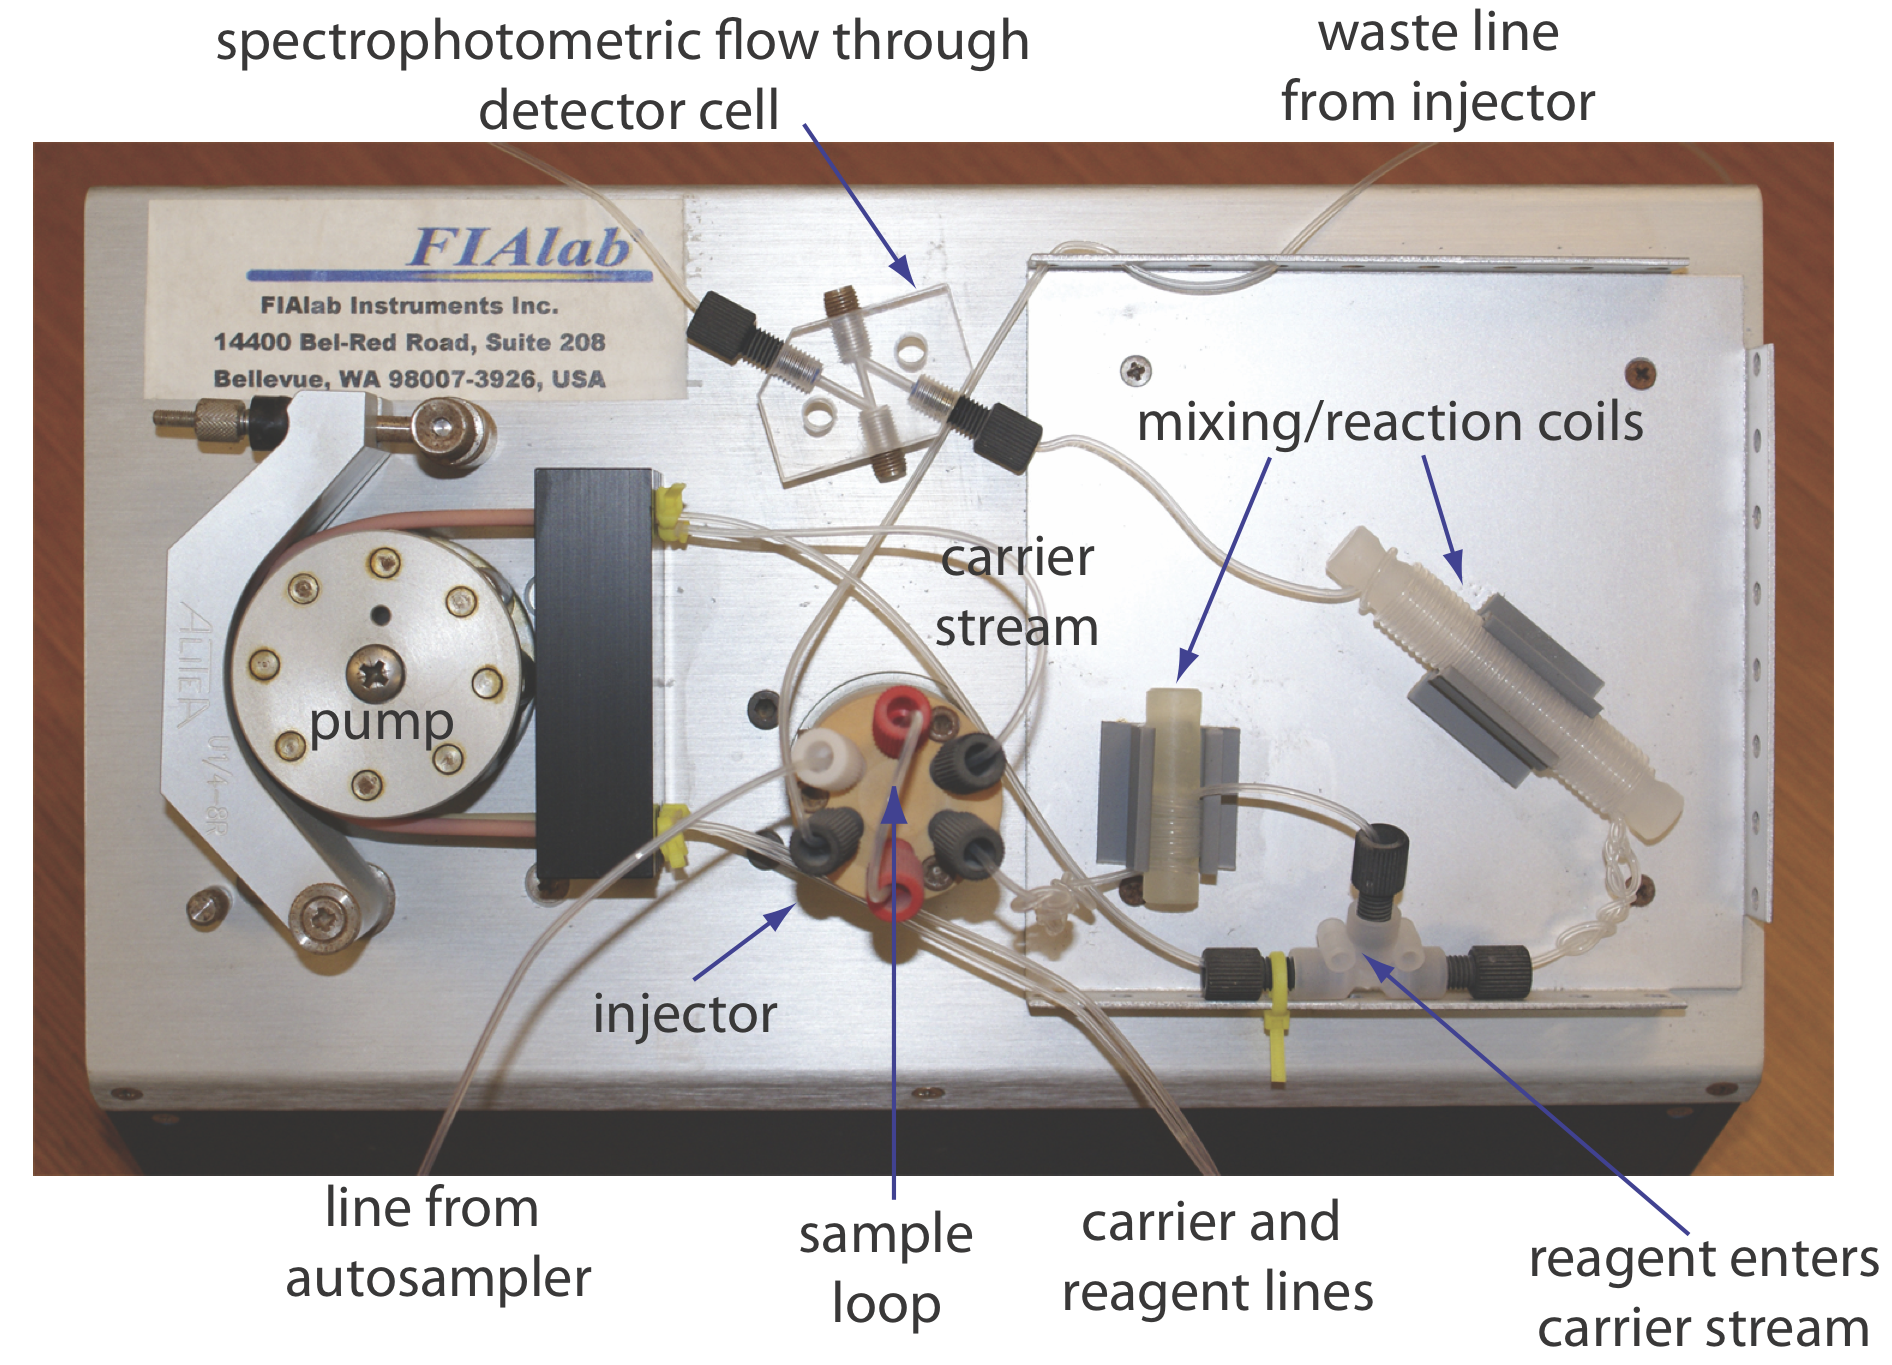 Example of a typical flow injection analyzer that shows the pump, the injector, the transport system, which consists of mixing/reaction coils and junctions, and the detector (minus the spectrophotometer). This particular configuration has two channels: the carrier stream and a reagent line.